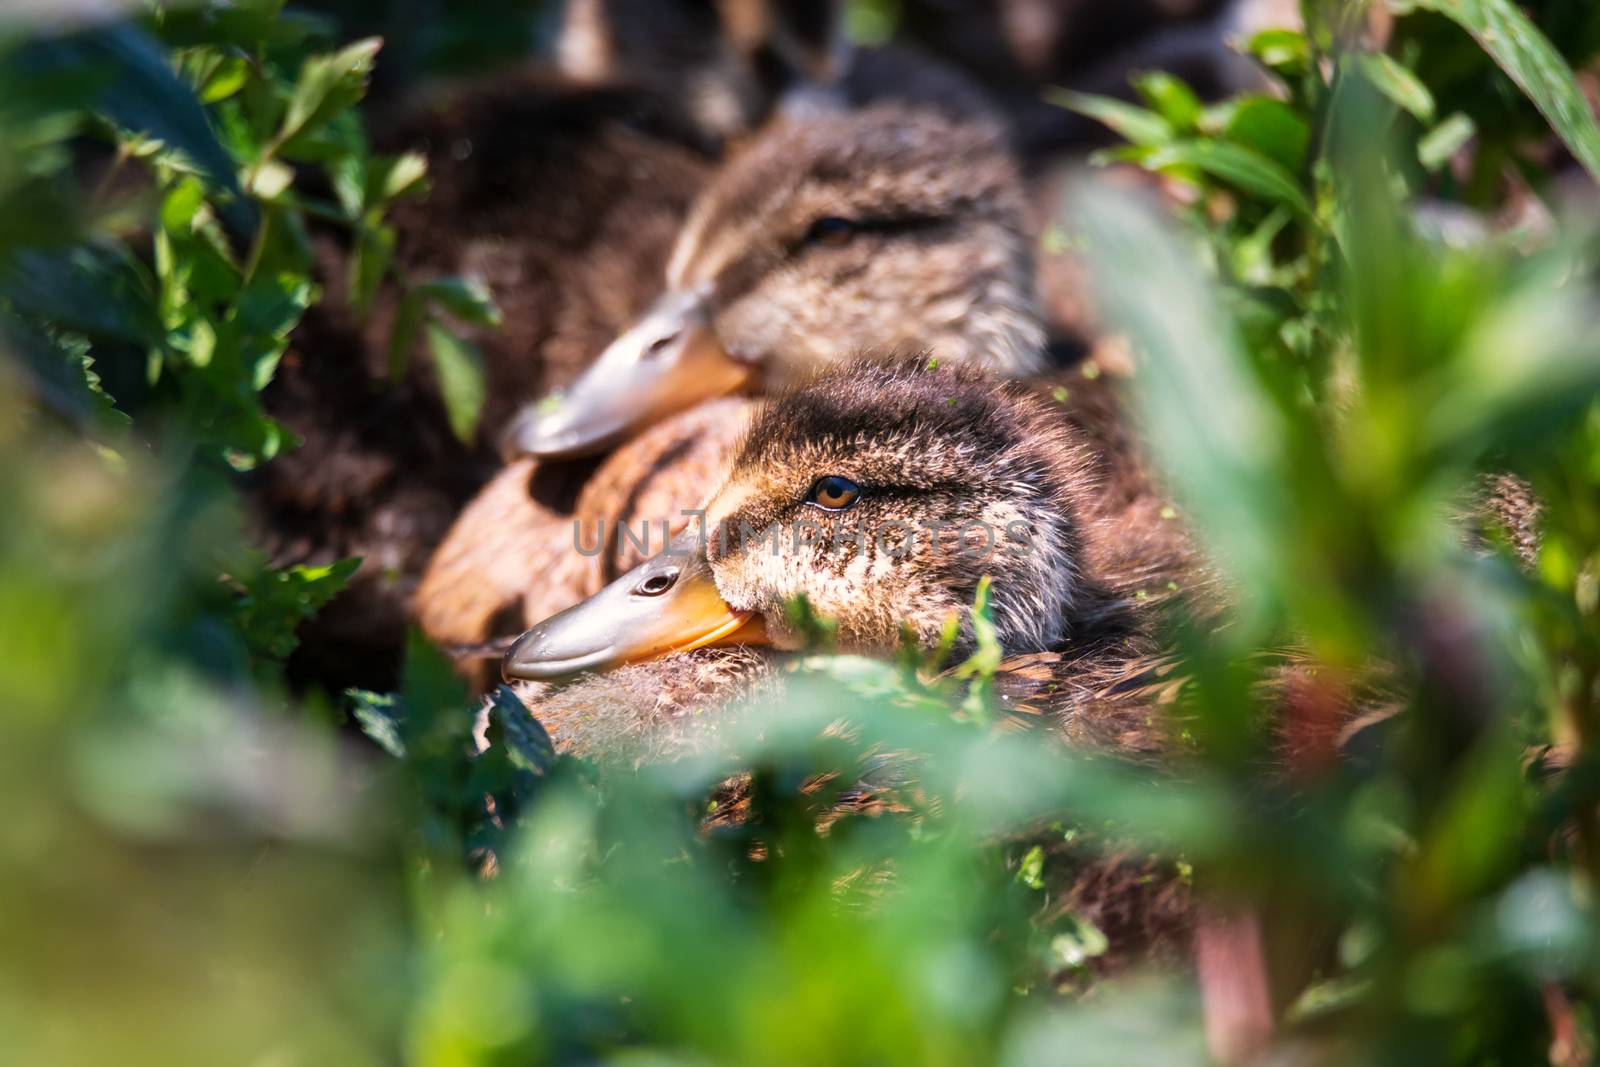 Several Ducklings Huddled Together in a Northern California Marsh by backyard_photography